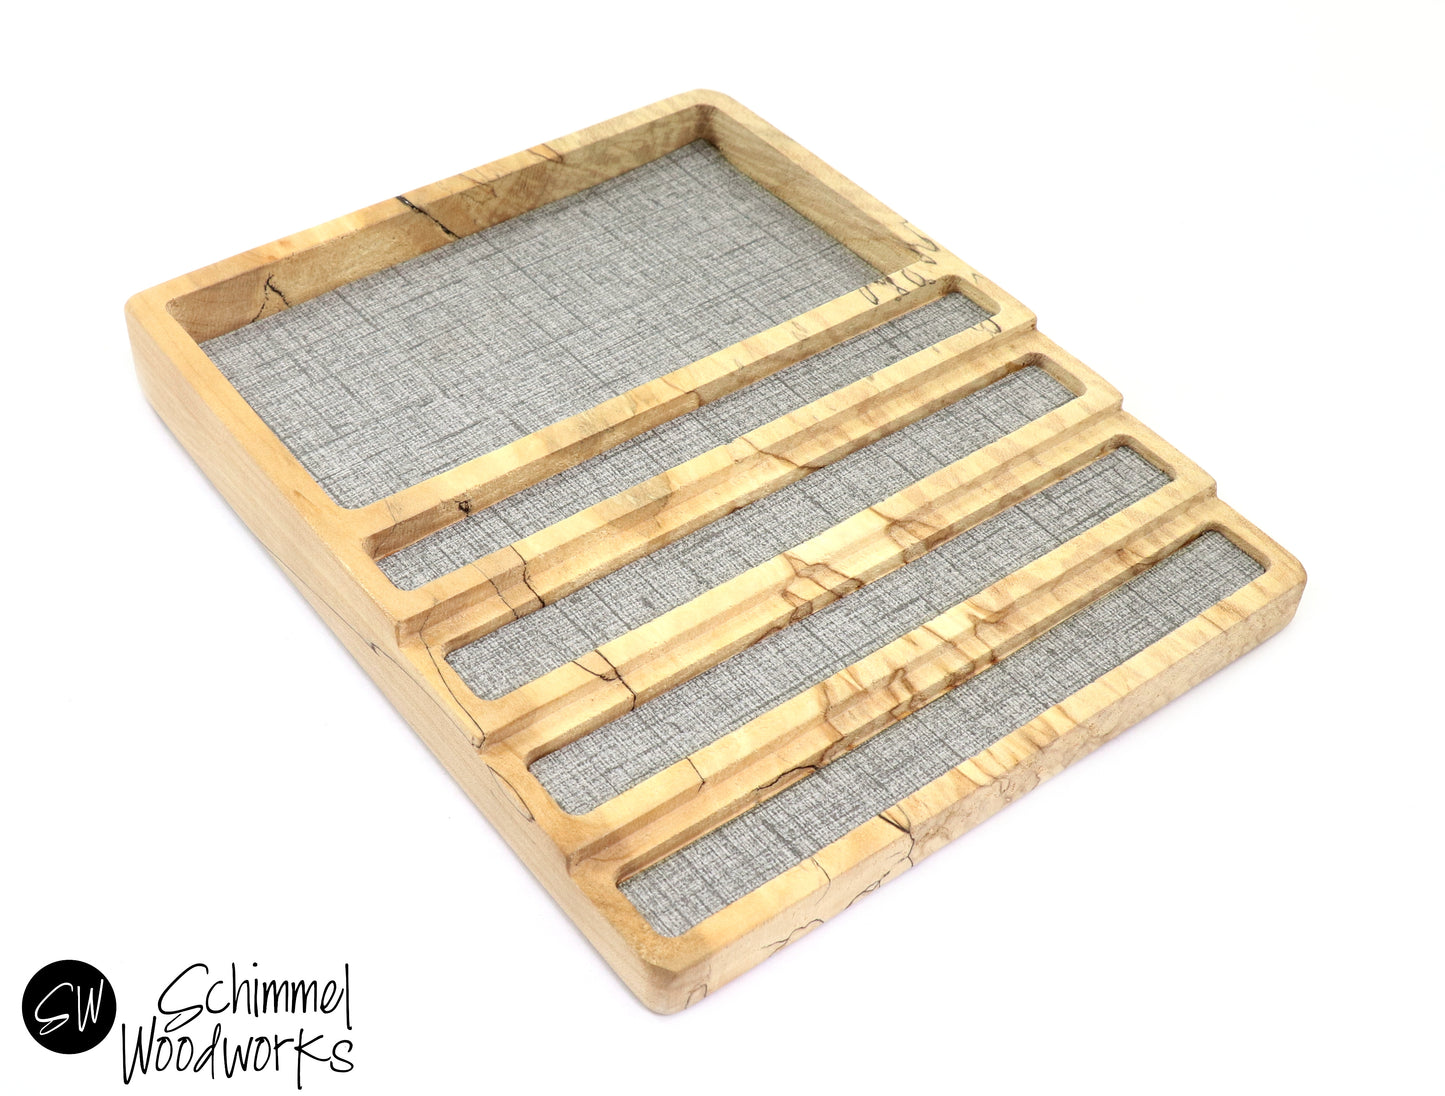 Pen tray with Desk Organizer - Fits 4 pens